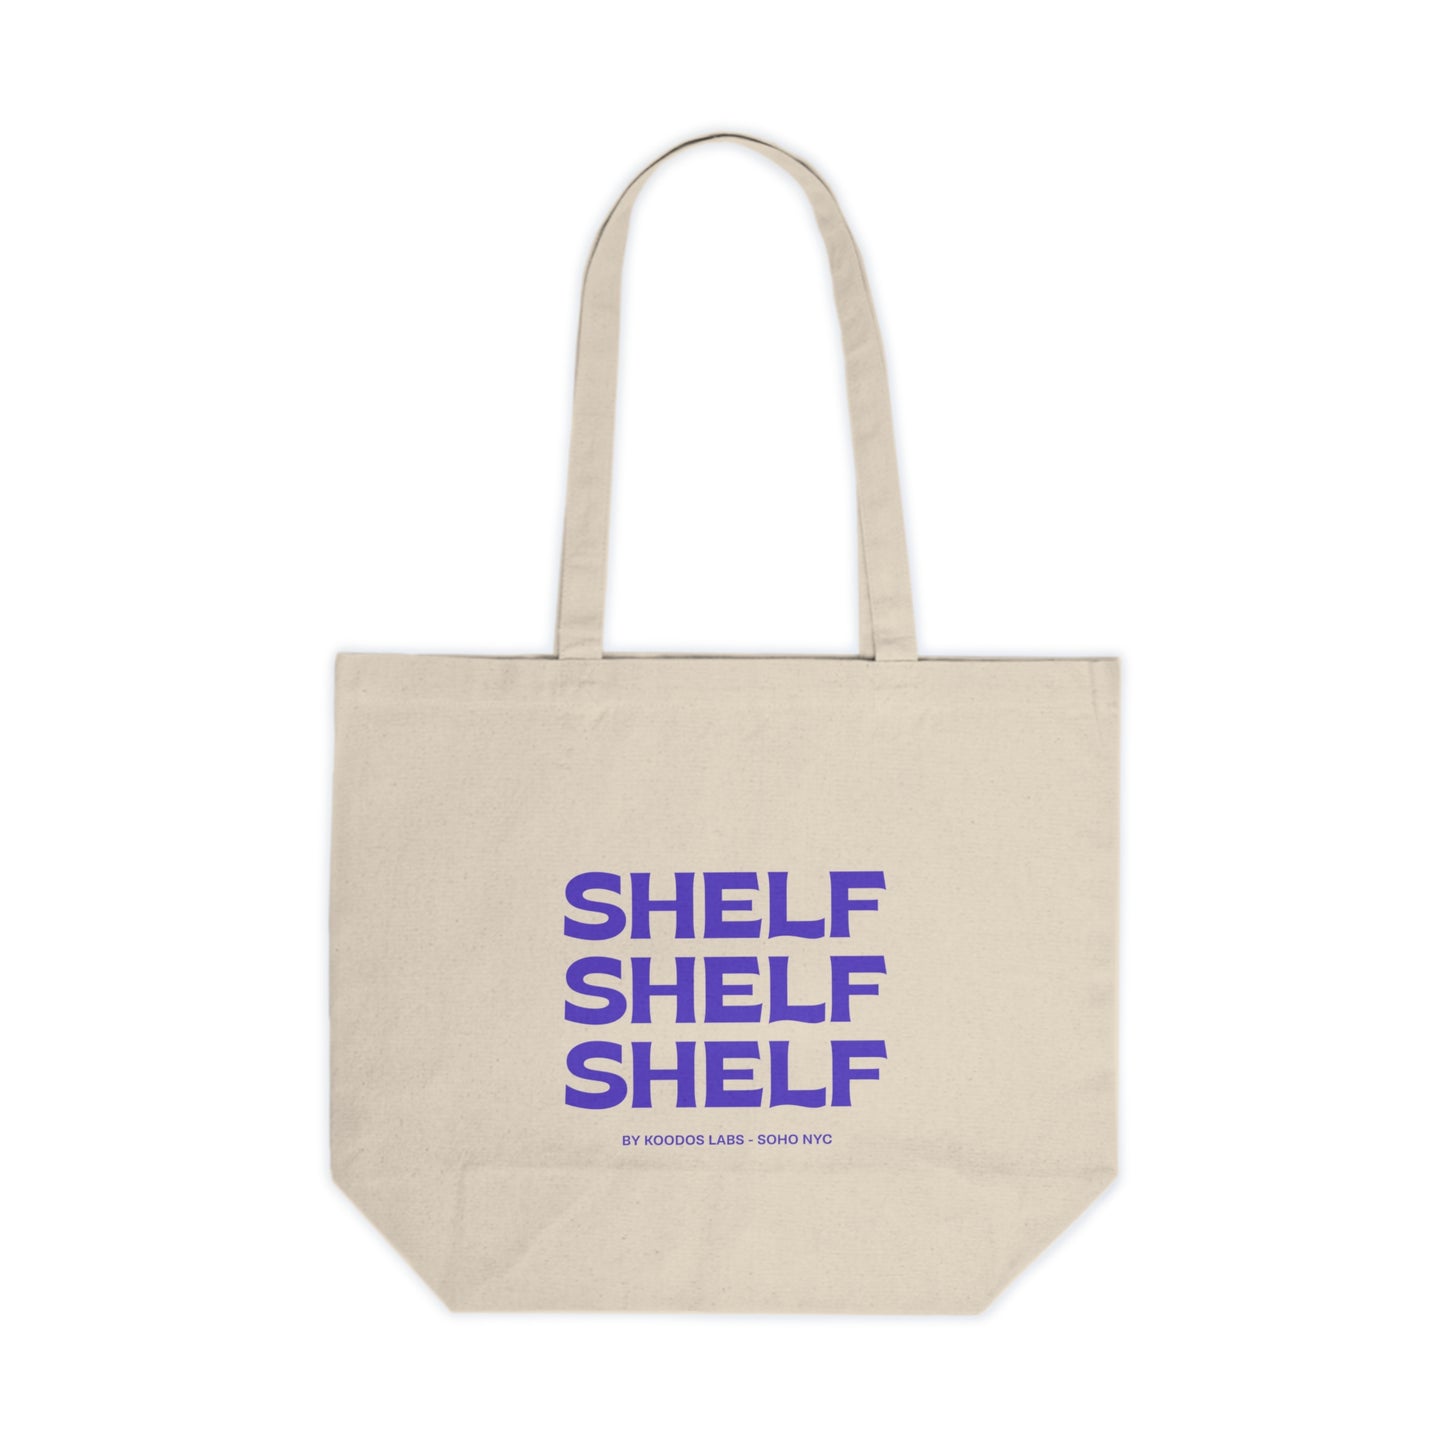 What's on Your Shelf? Tote Bag